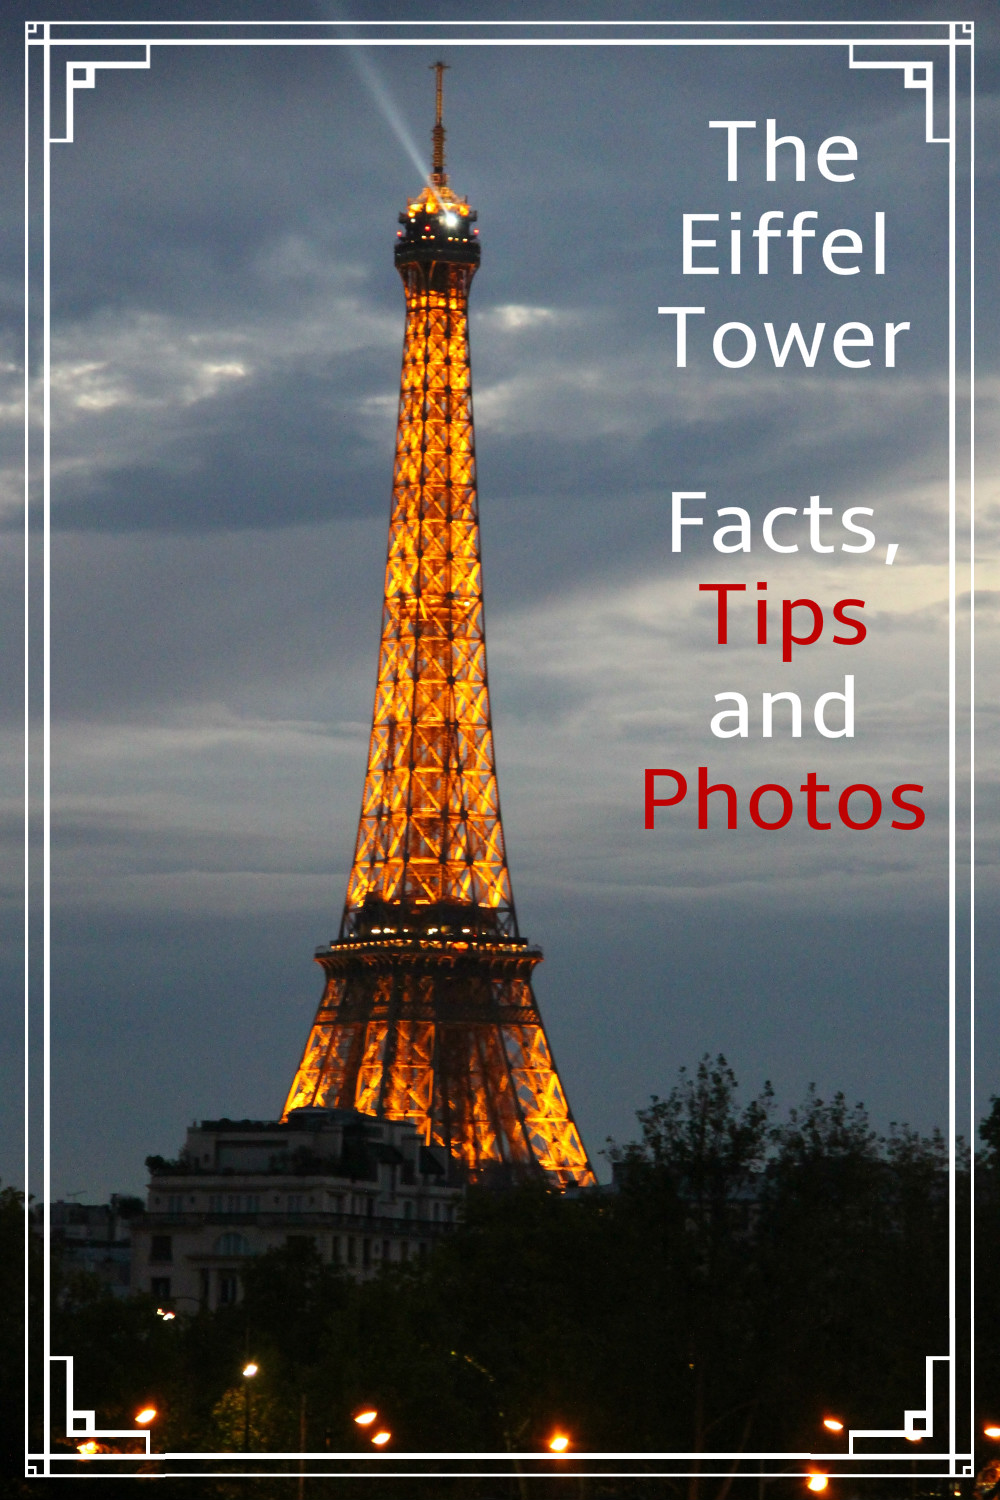 The Eiffel Tower: #tips, facts, #photos #Paris #France #travel #Europe